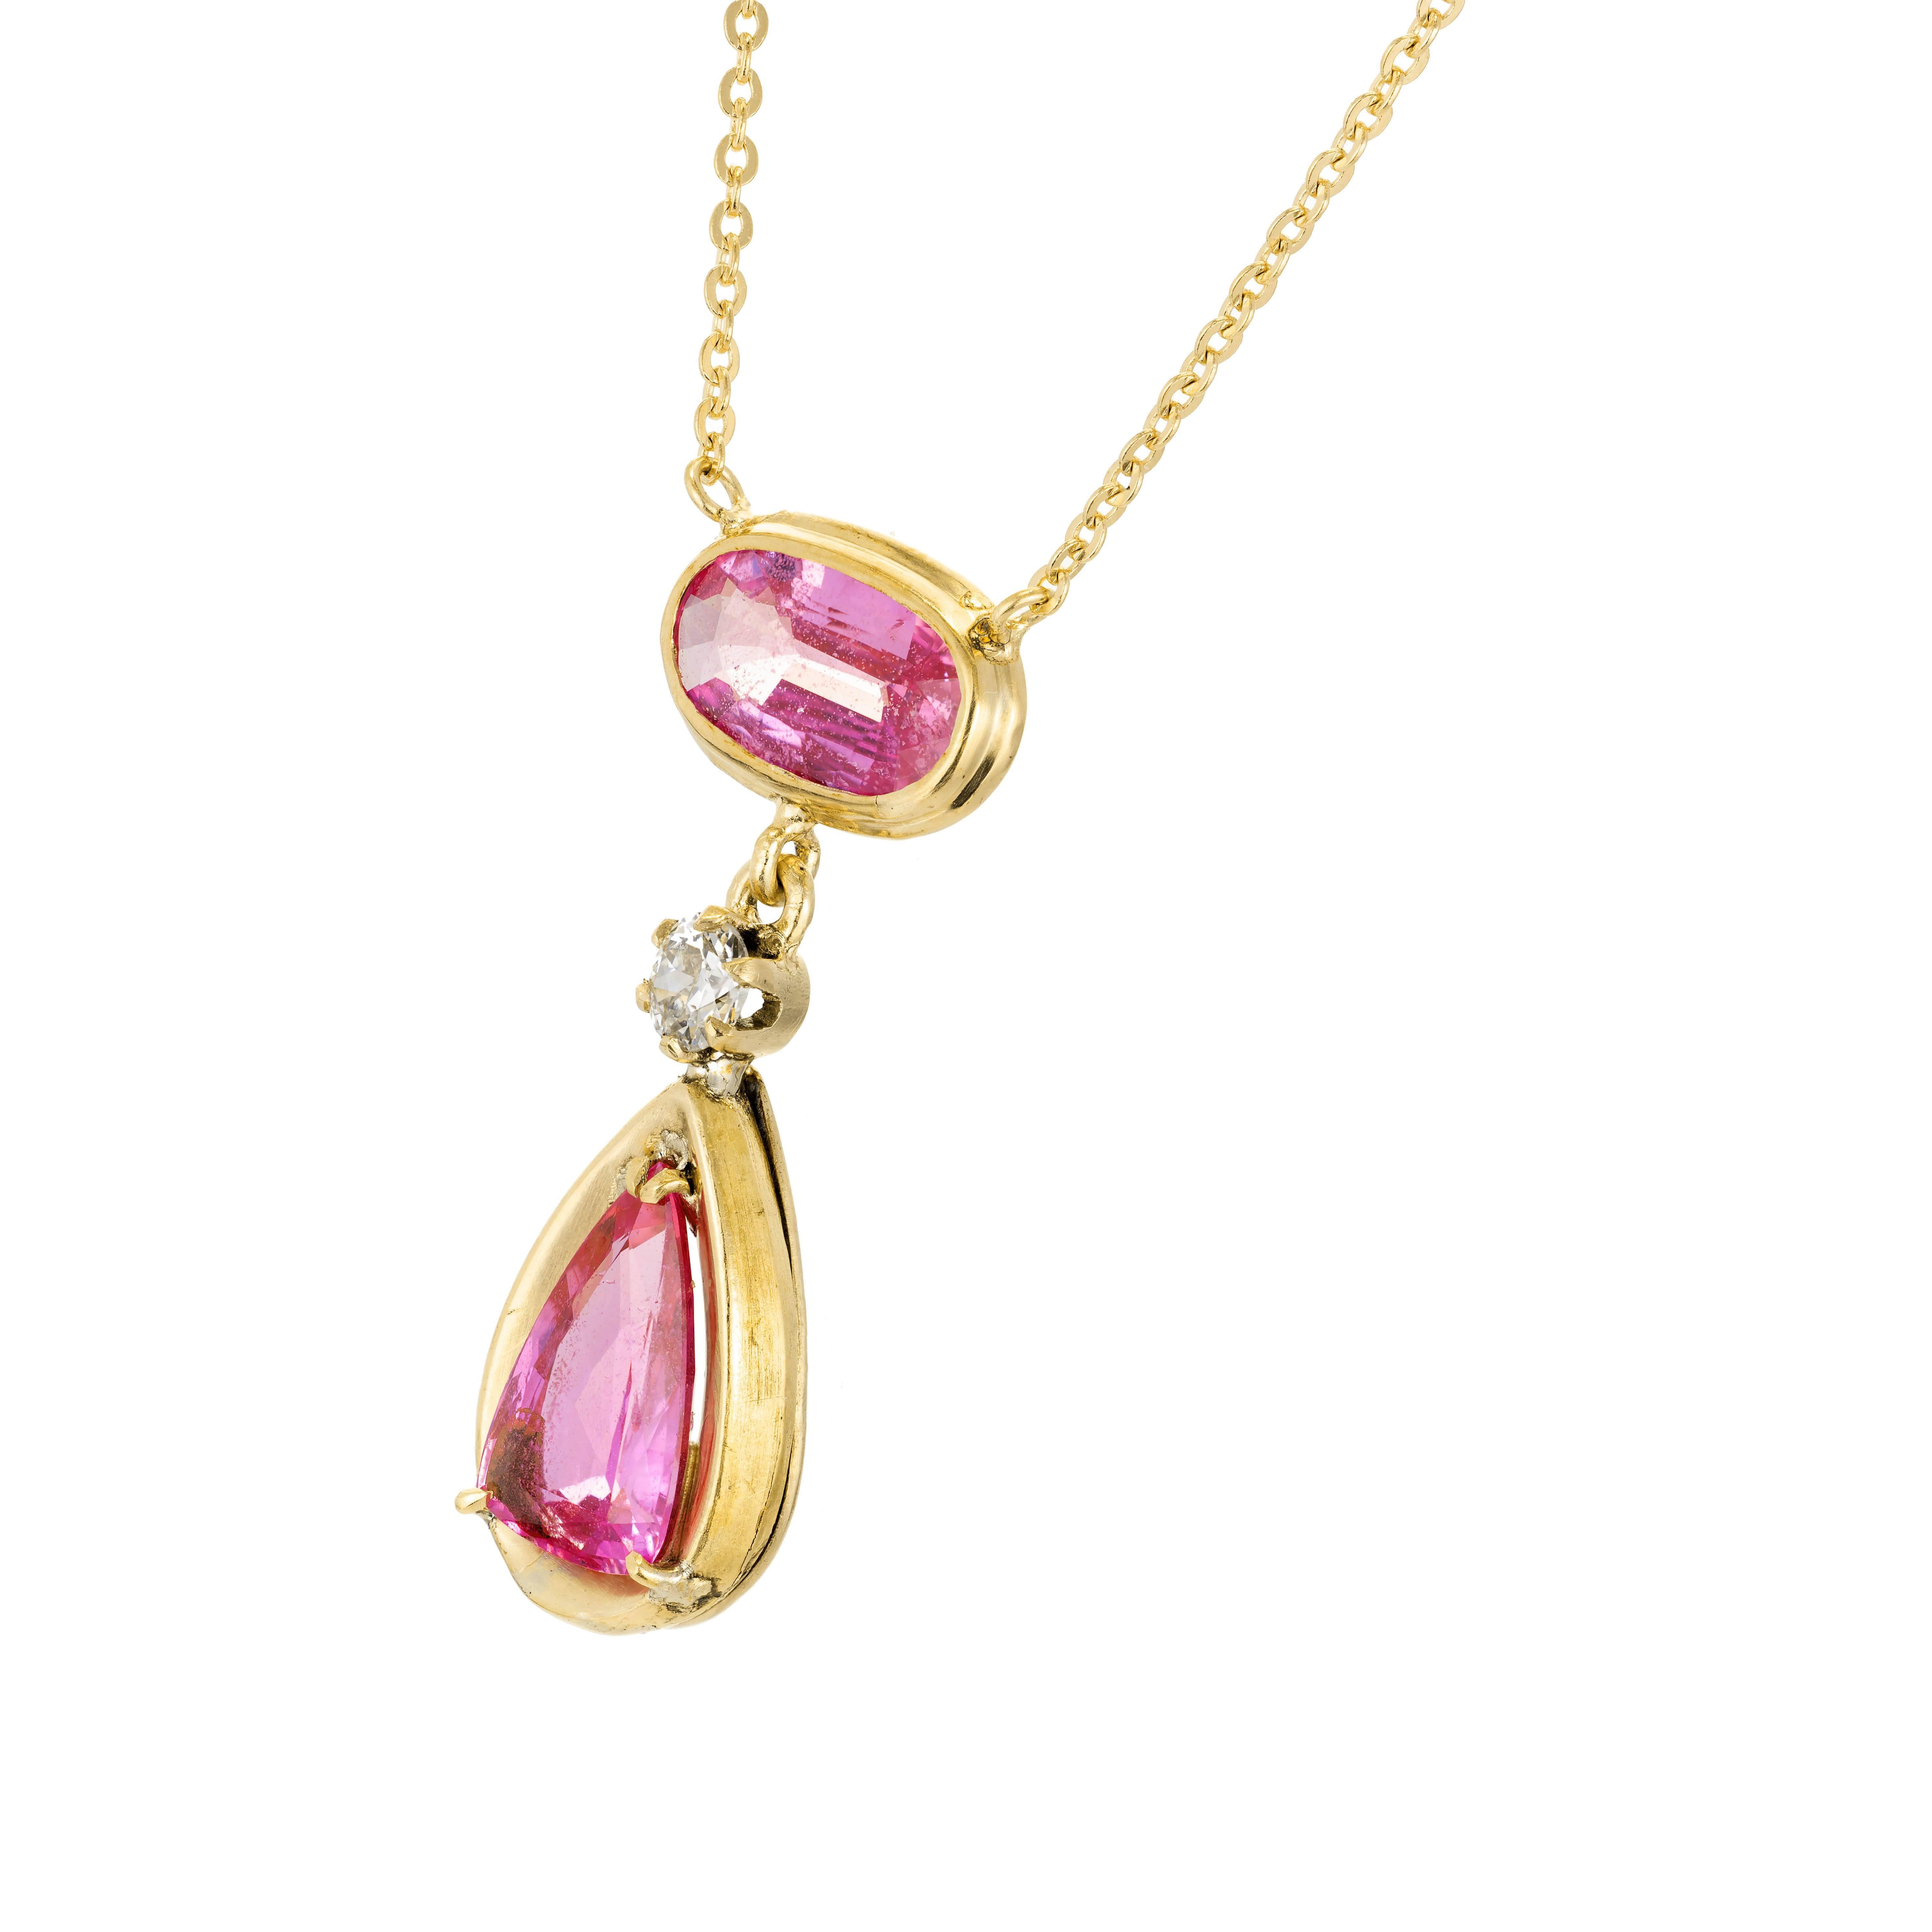 Bright pink oval and pear Sapphire, diamond pendant necklace. circa 1920 to 1930 with natural color and simple heat only. 14k rose gold. Chain may be later.

1 oval pink Sapphire, approx. total weight 2.25cts, SI, 9.12 x 4.98 x 2.60mm, natural color